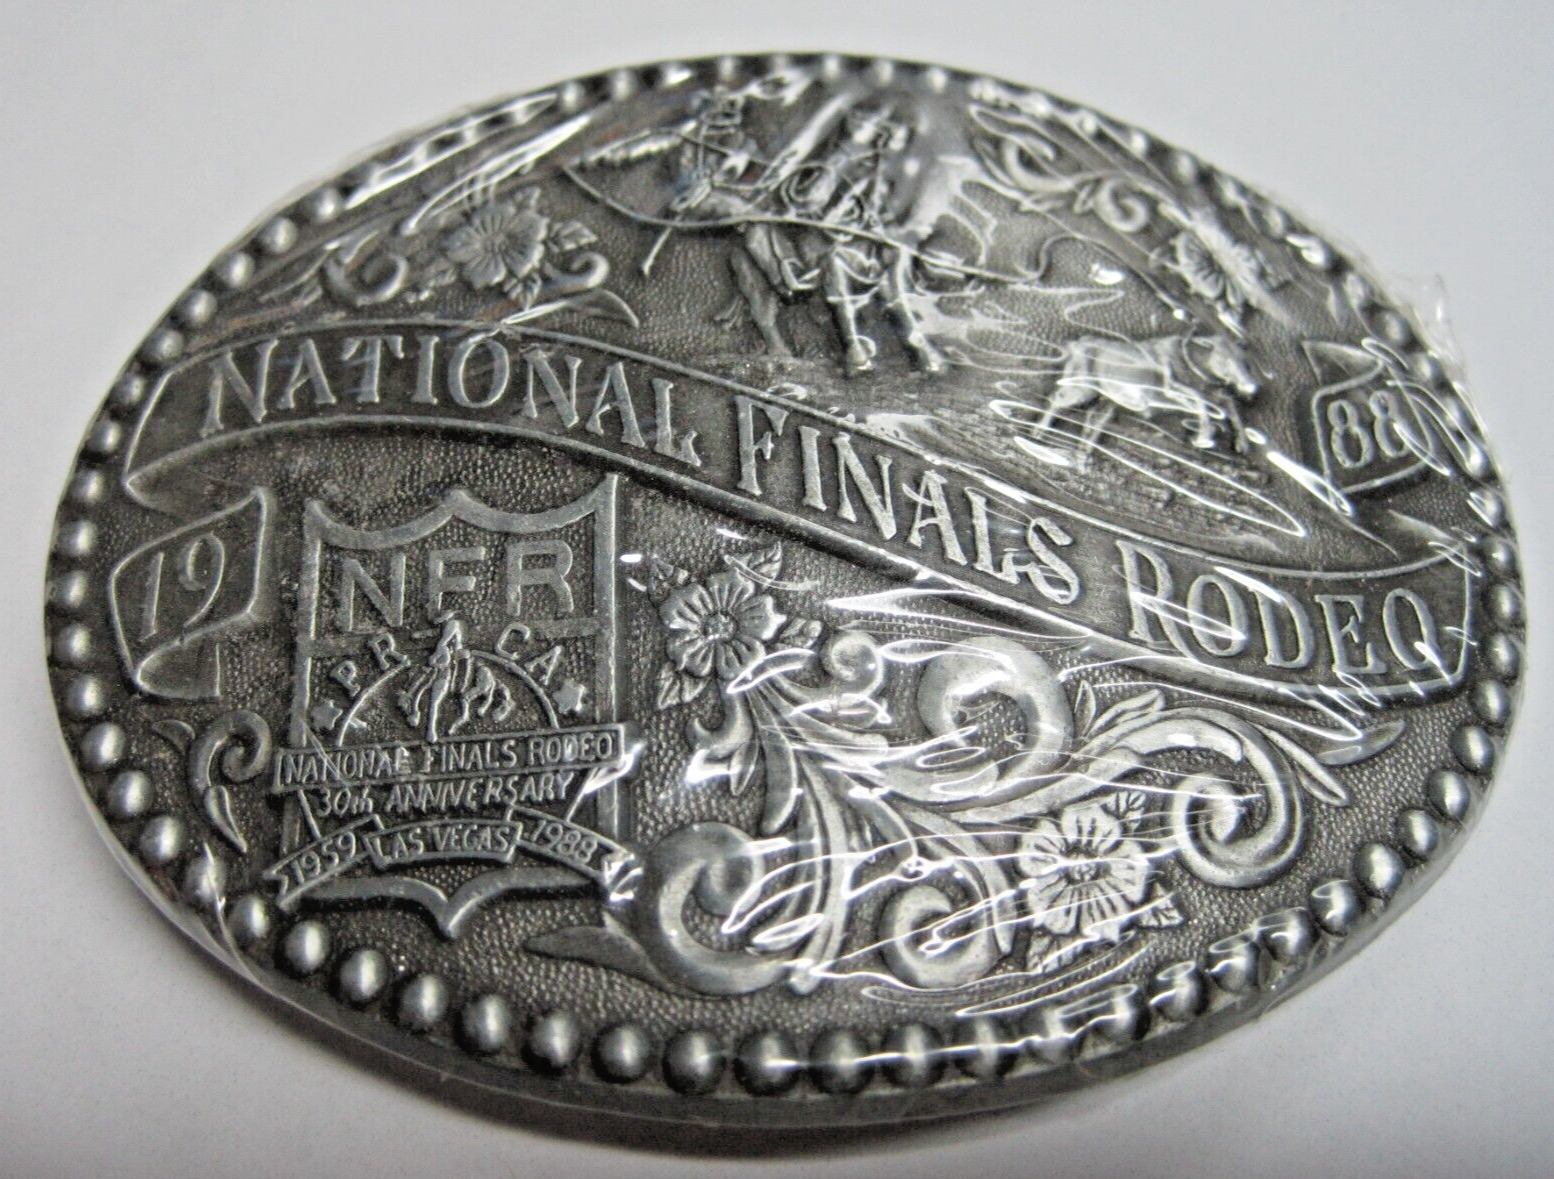 NFR 1988 National Finals Rodeo Buckle New in Shrink wrap, 30th Anniversary